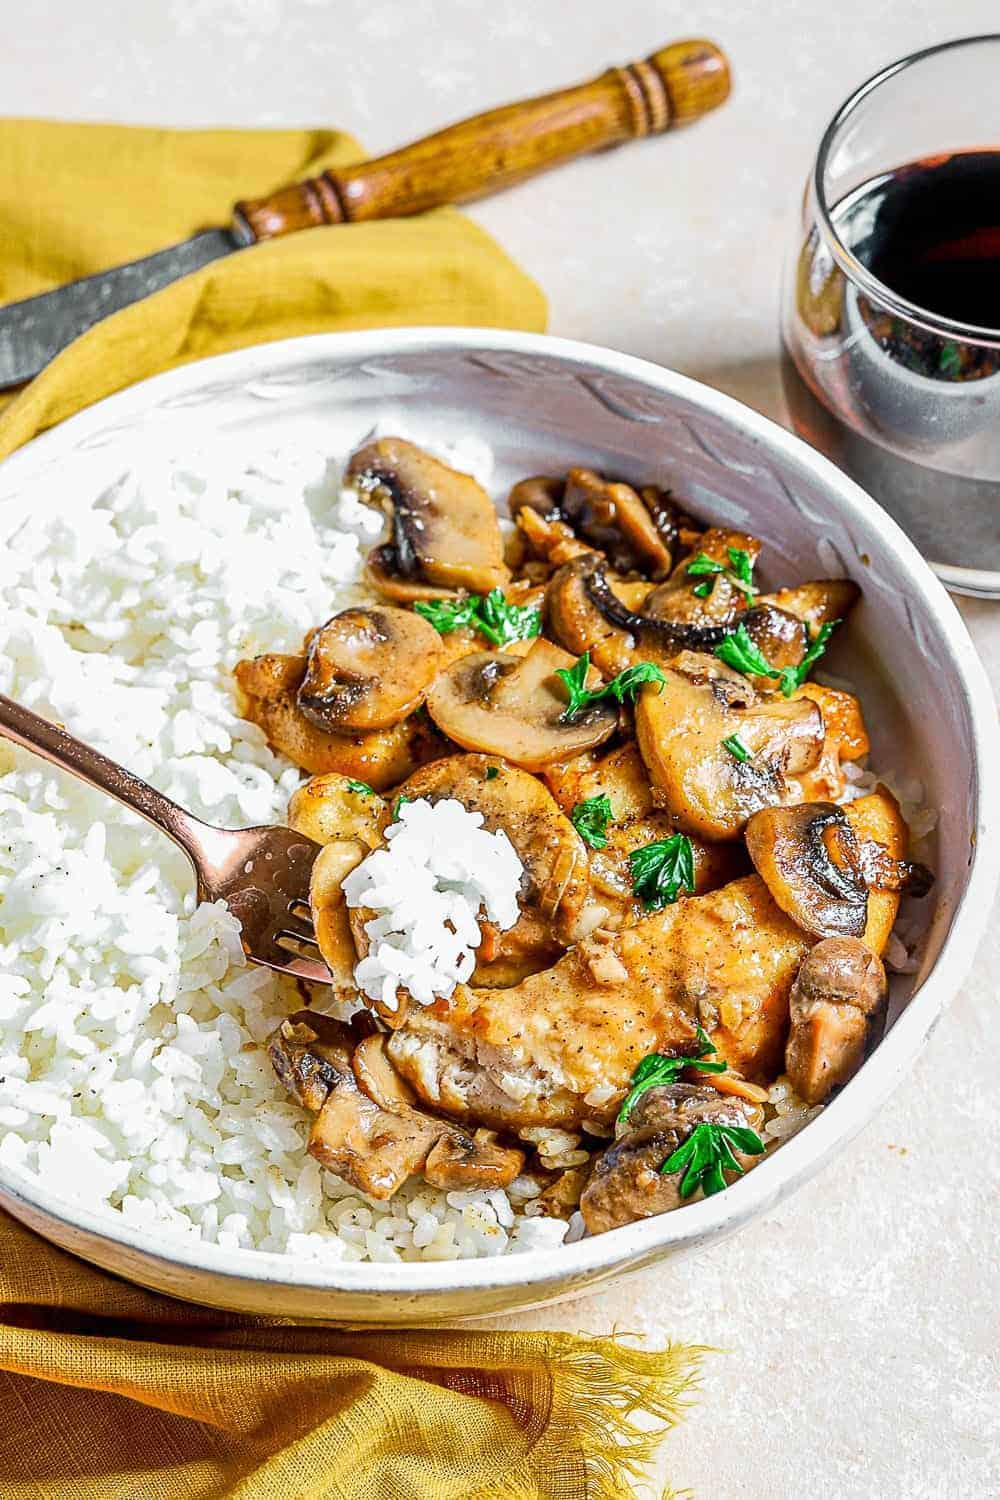 A mushroom and rice on a fork